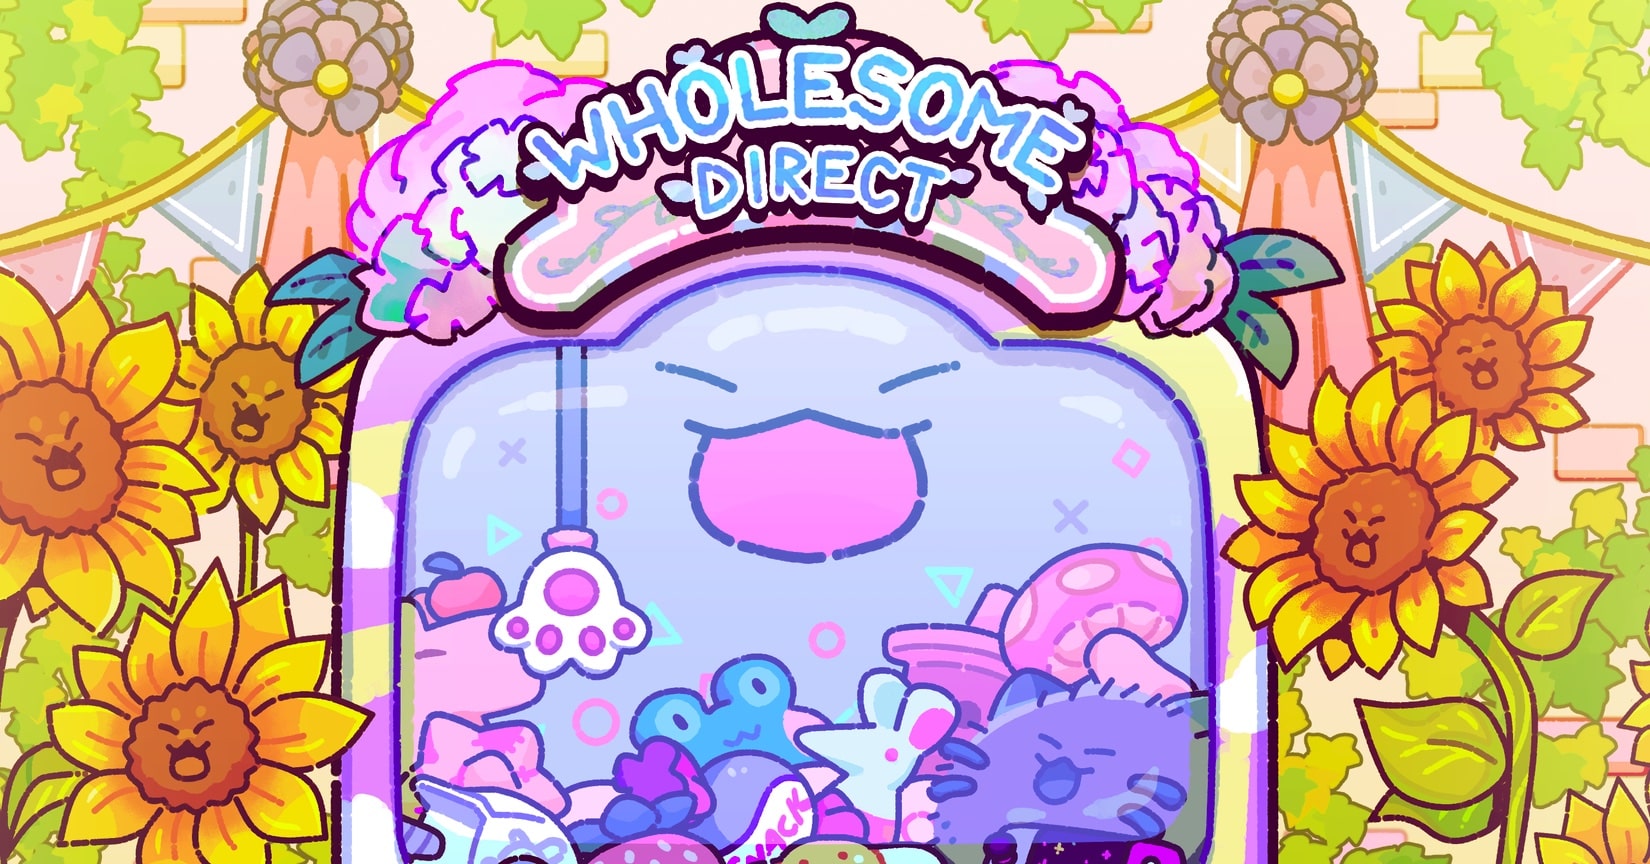 Wholesome Direct game showcase returns this June